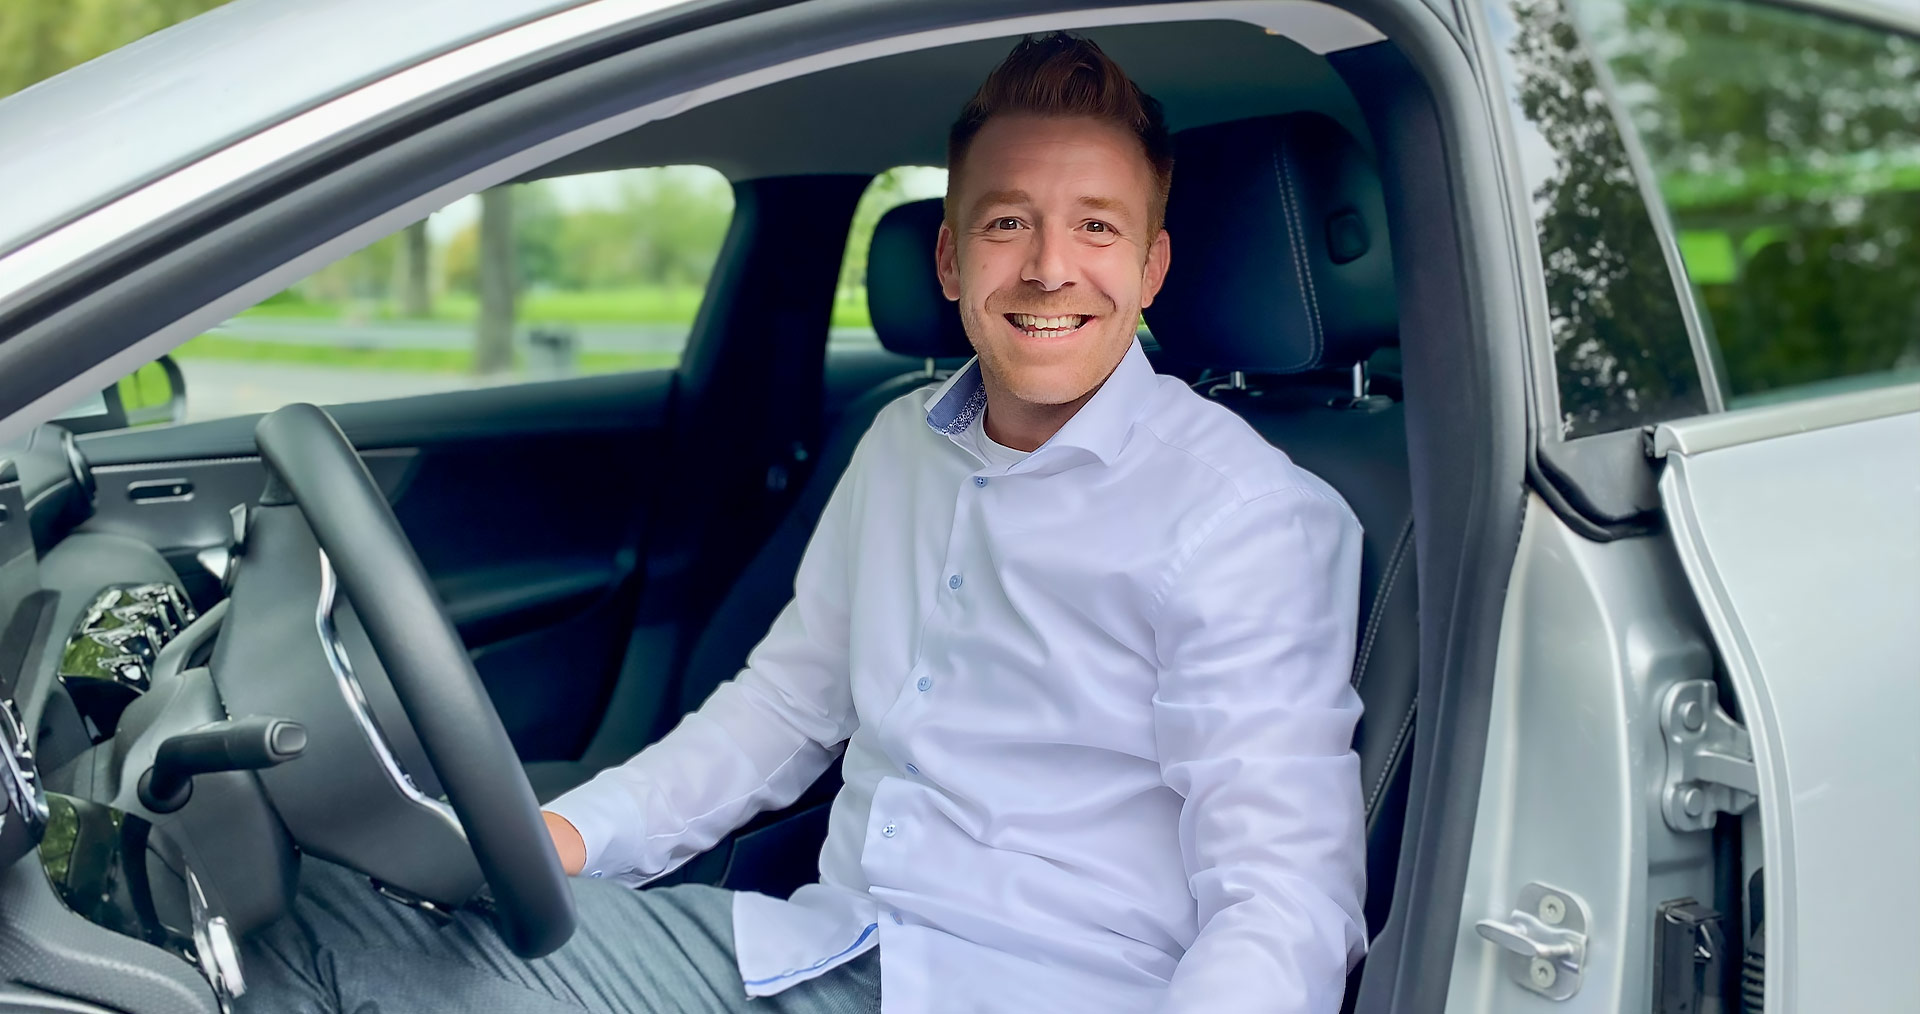 Benjamin Keller, sales consultant at Geberit, smiling in his car on the way to clients